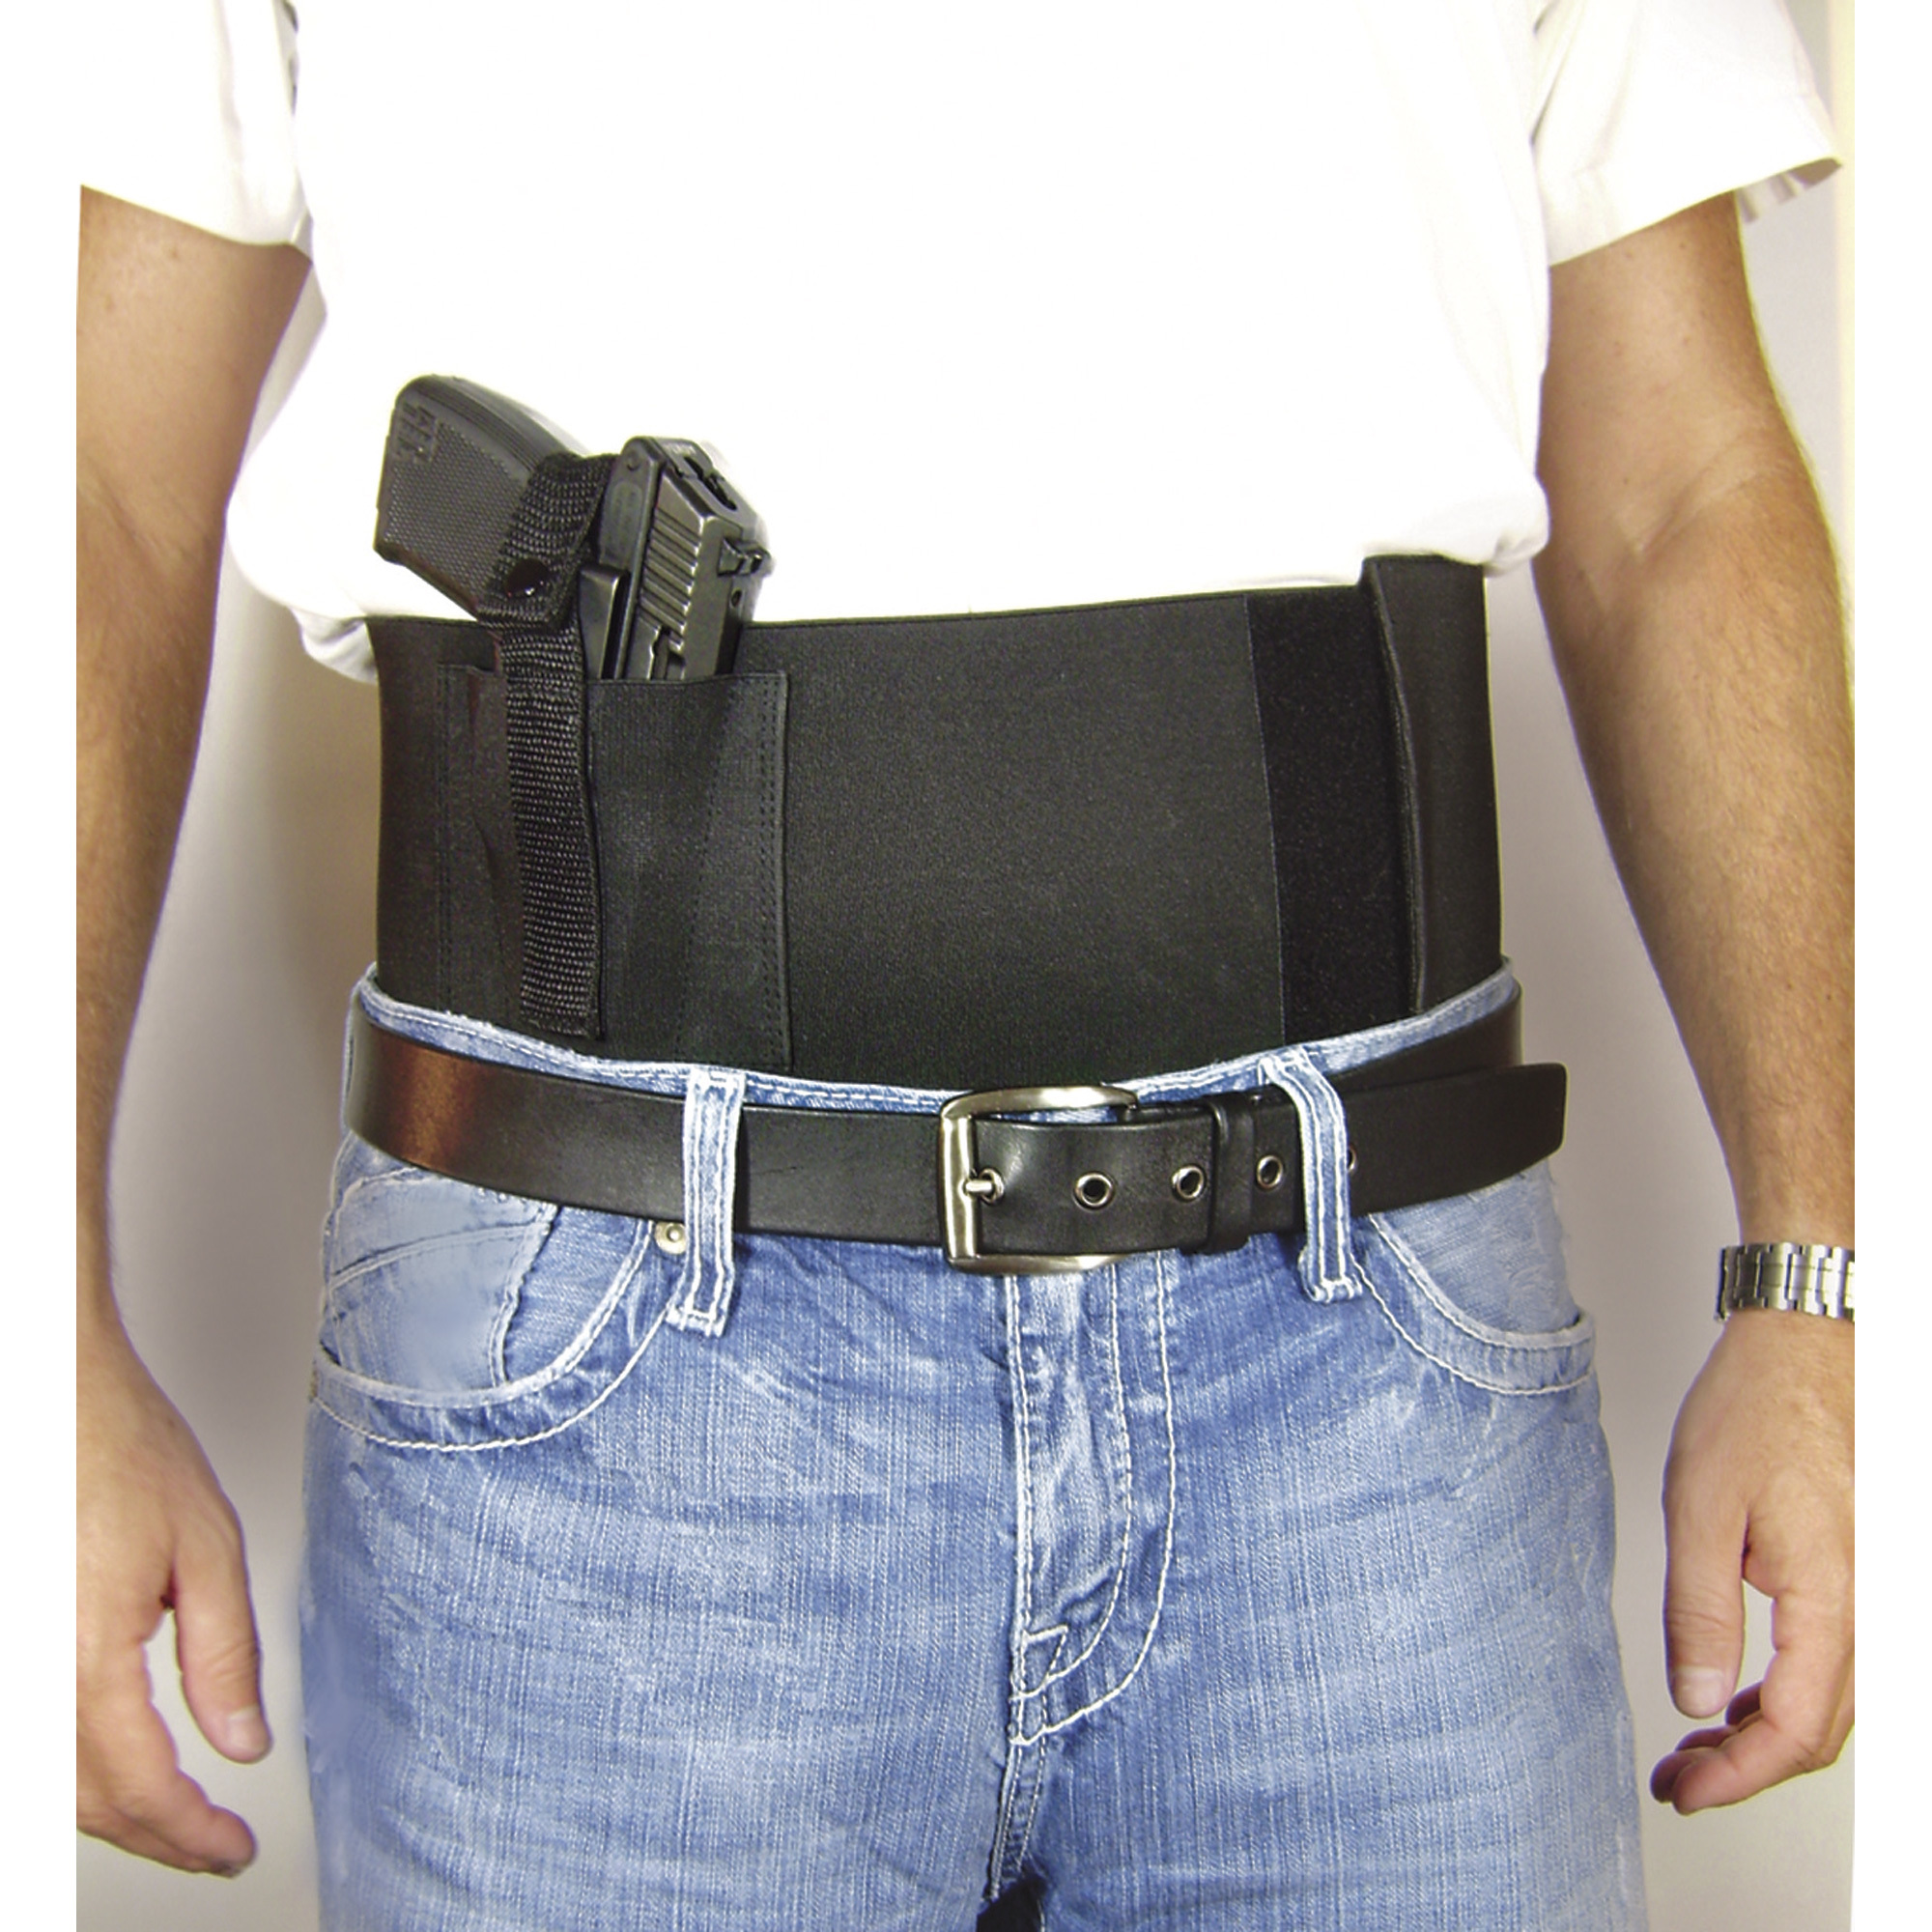 Waist Wrap Holster with 2 Mag Pockets â Conceal and Carry with Safety and Ease â Large